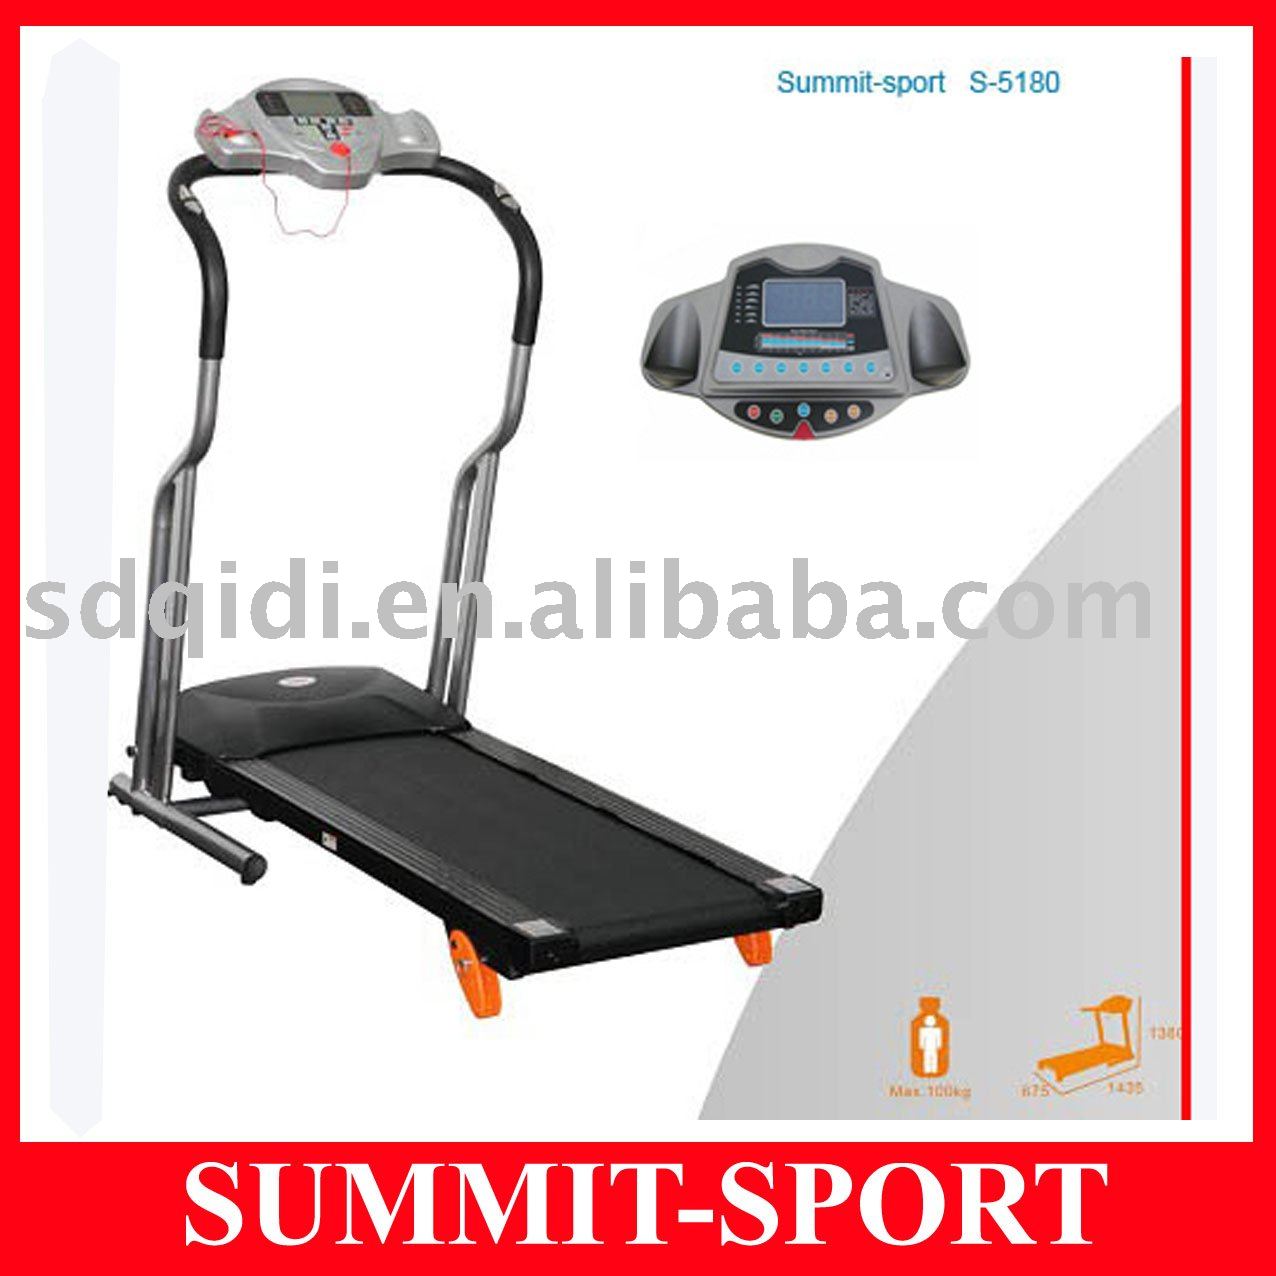 You might also be interested in Treadmill, home treadmill, manual treadmill 